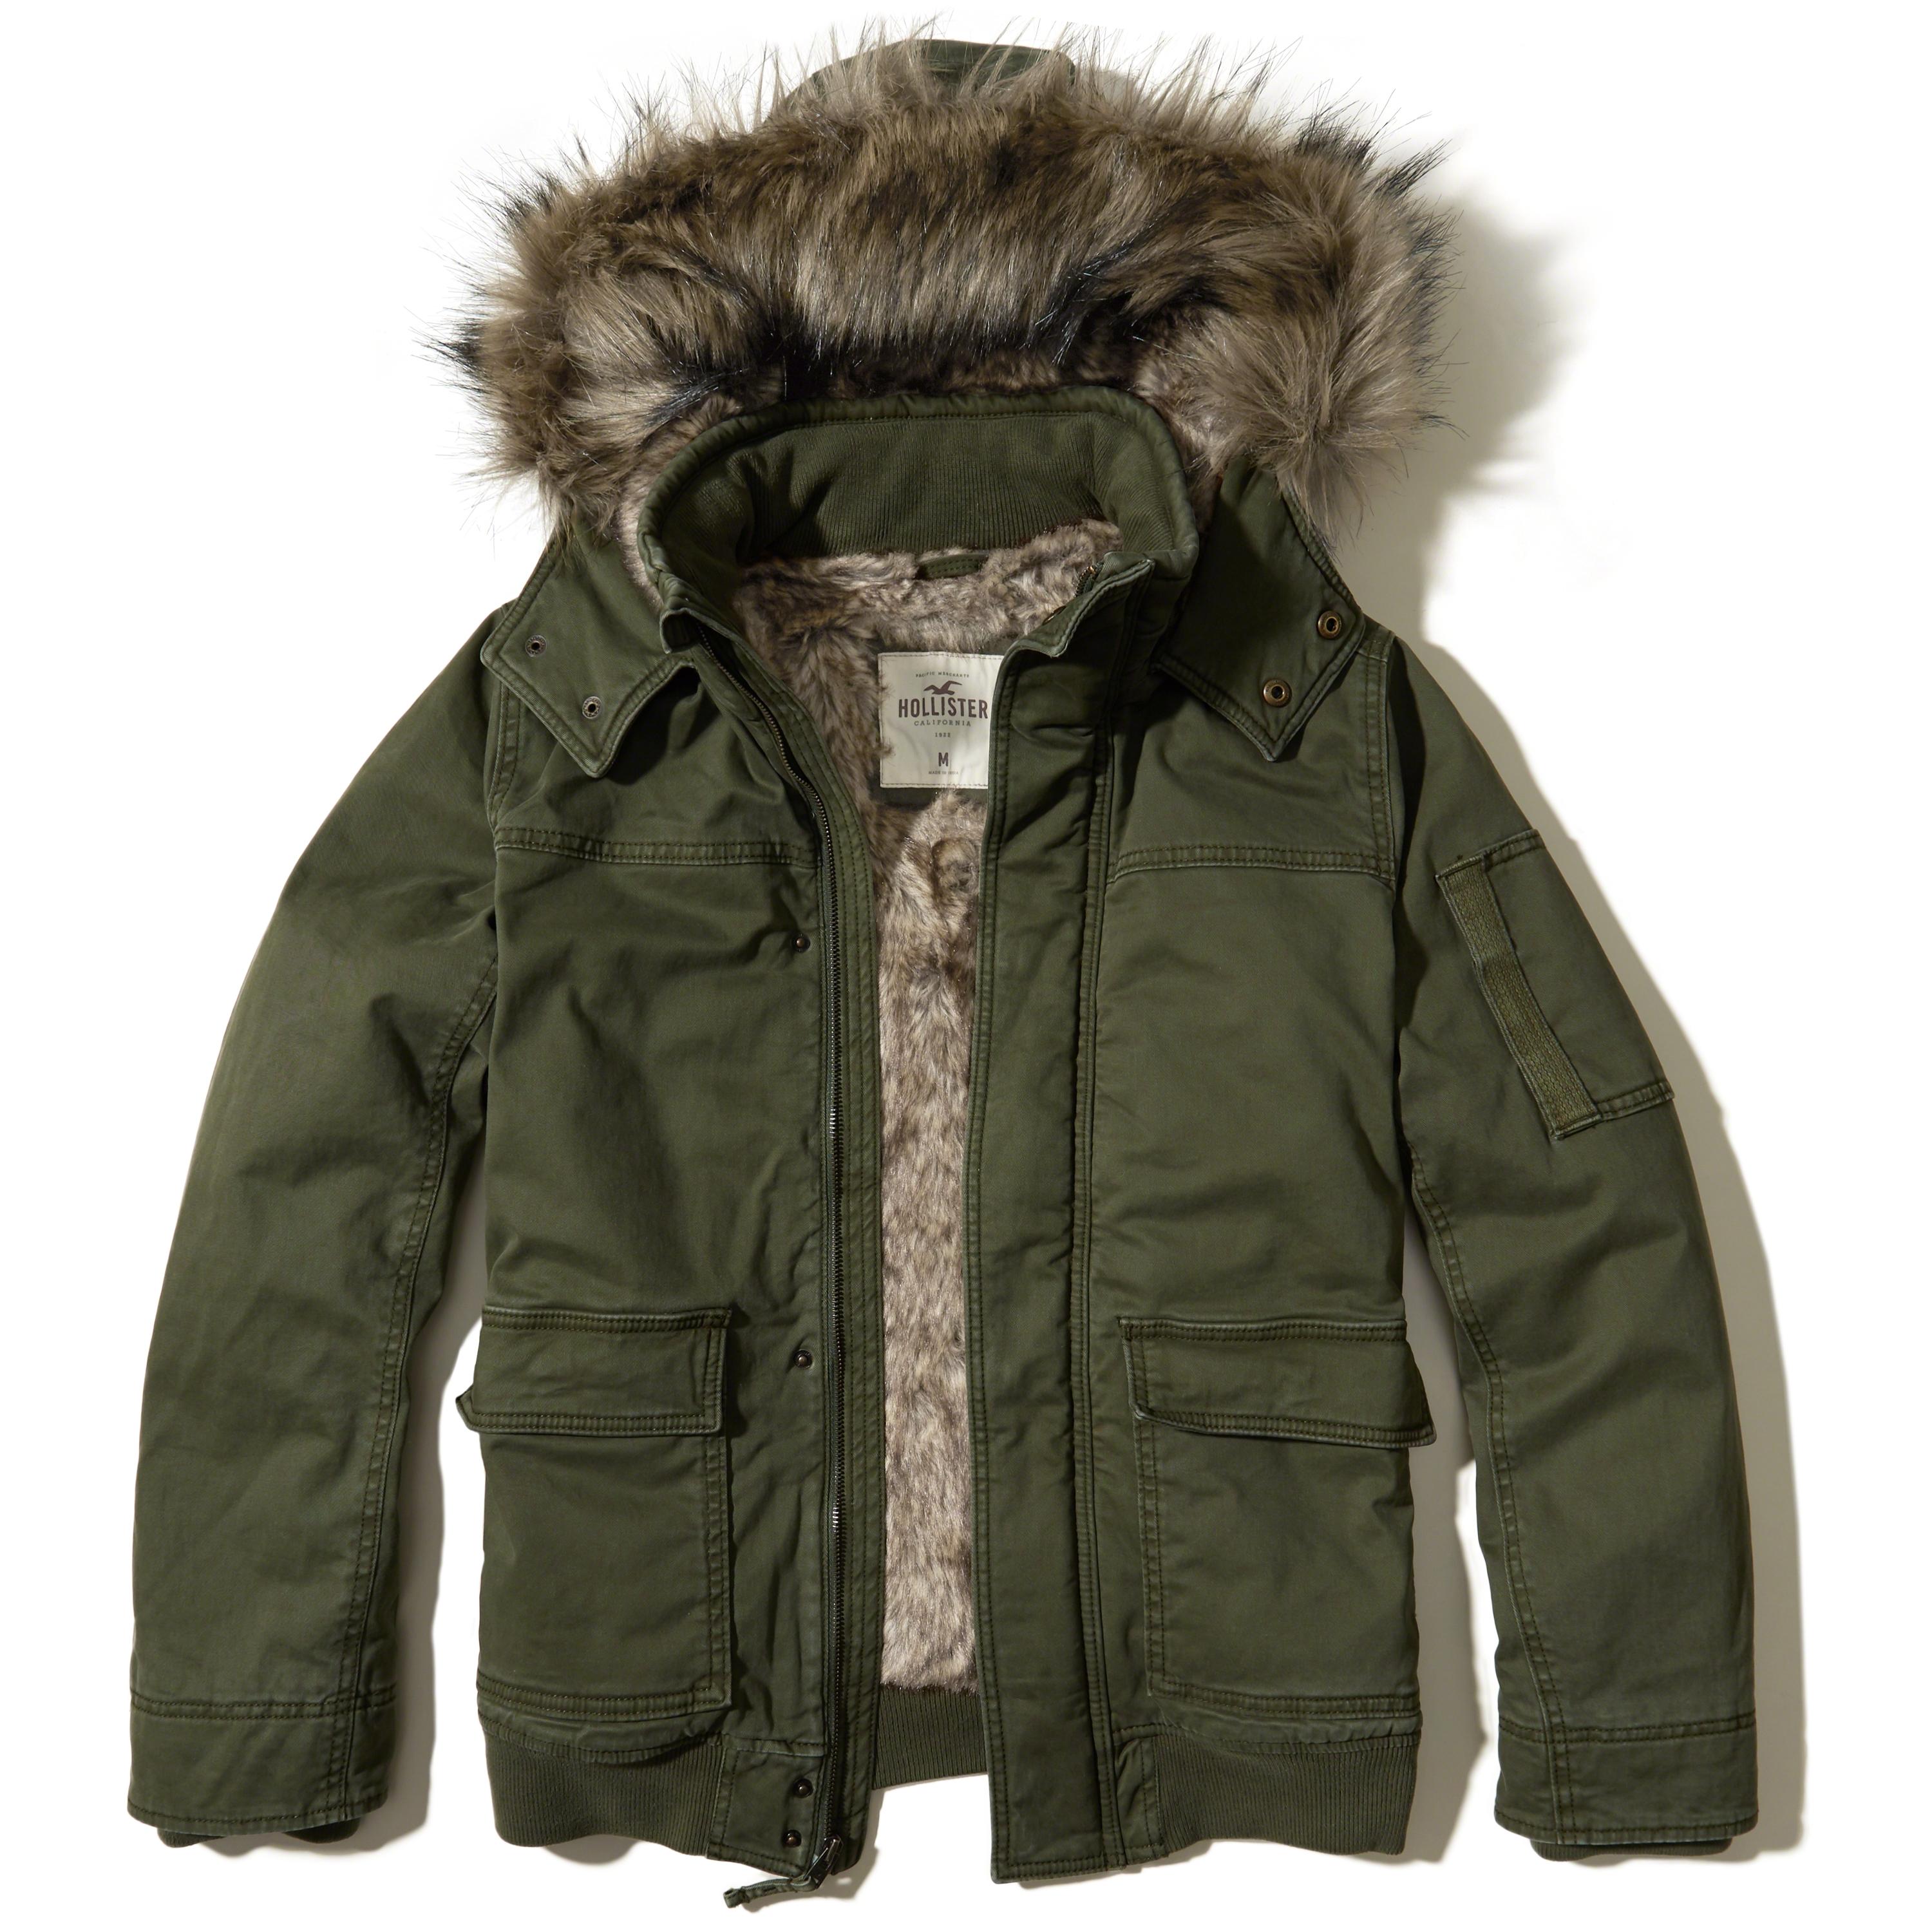 Lyst - Hollister Faux Fur Lined Twill Bomber Jacket in Green for Men ...